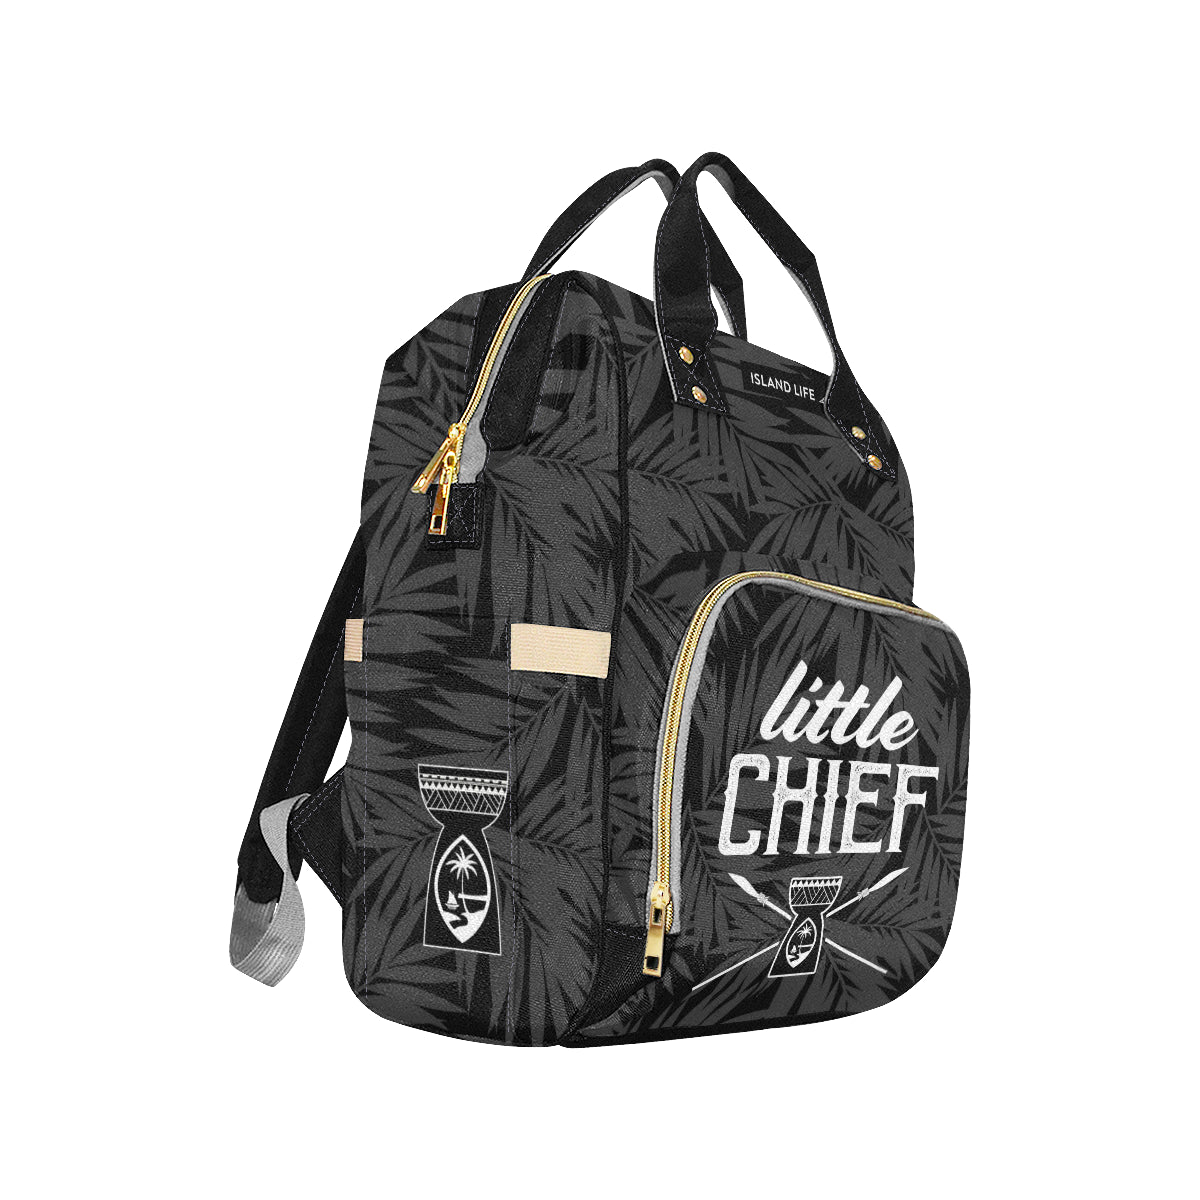 Little Chief Guam Baby Diaper Backpack Bag